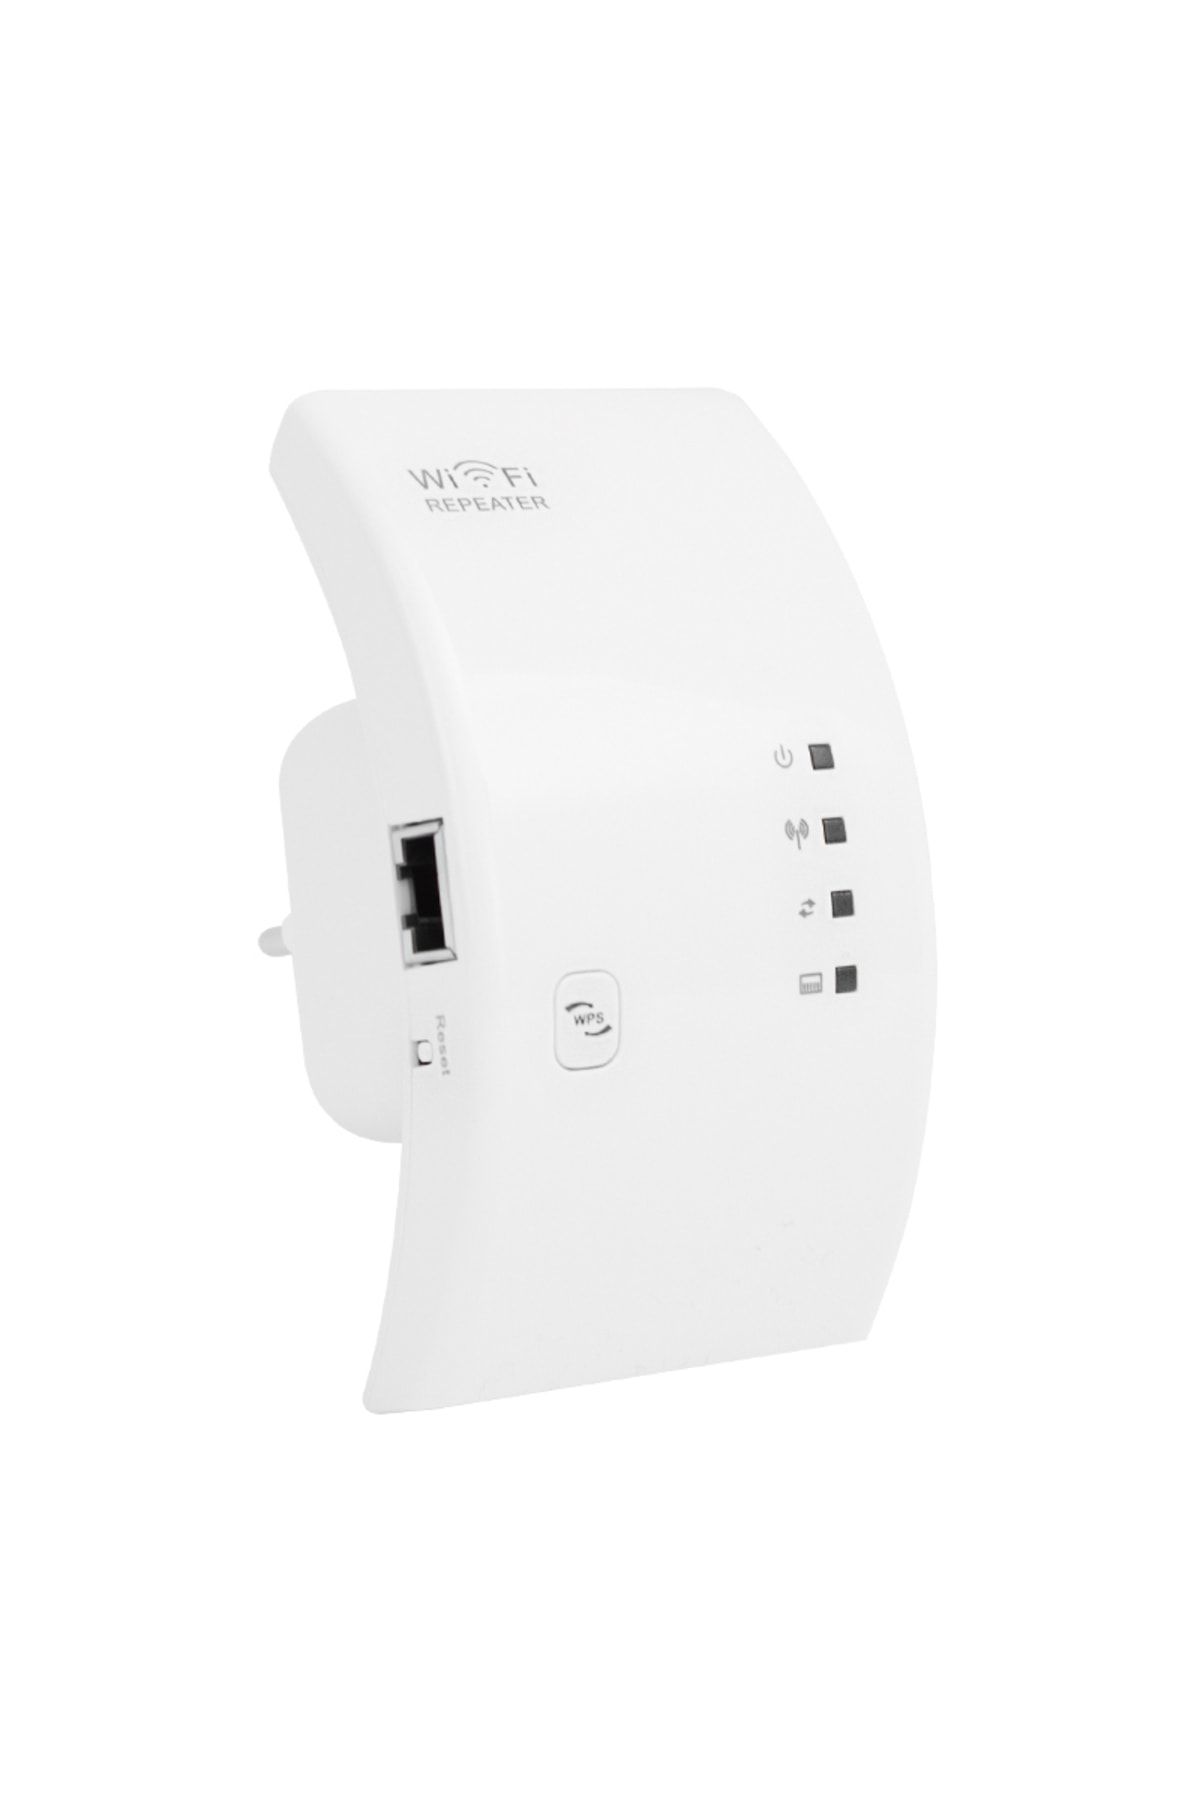 Powermaster PM-6659 300 MBPS ACCESS POINT + REPEATER + BRIDGE